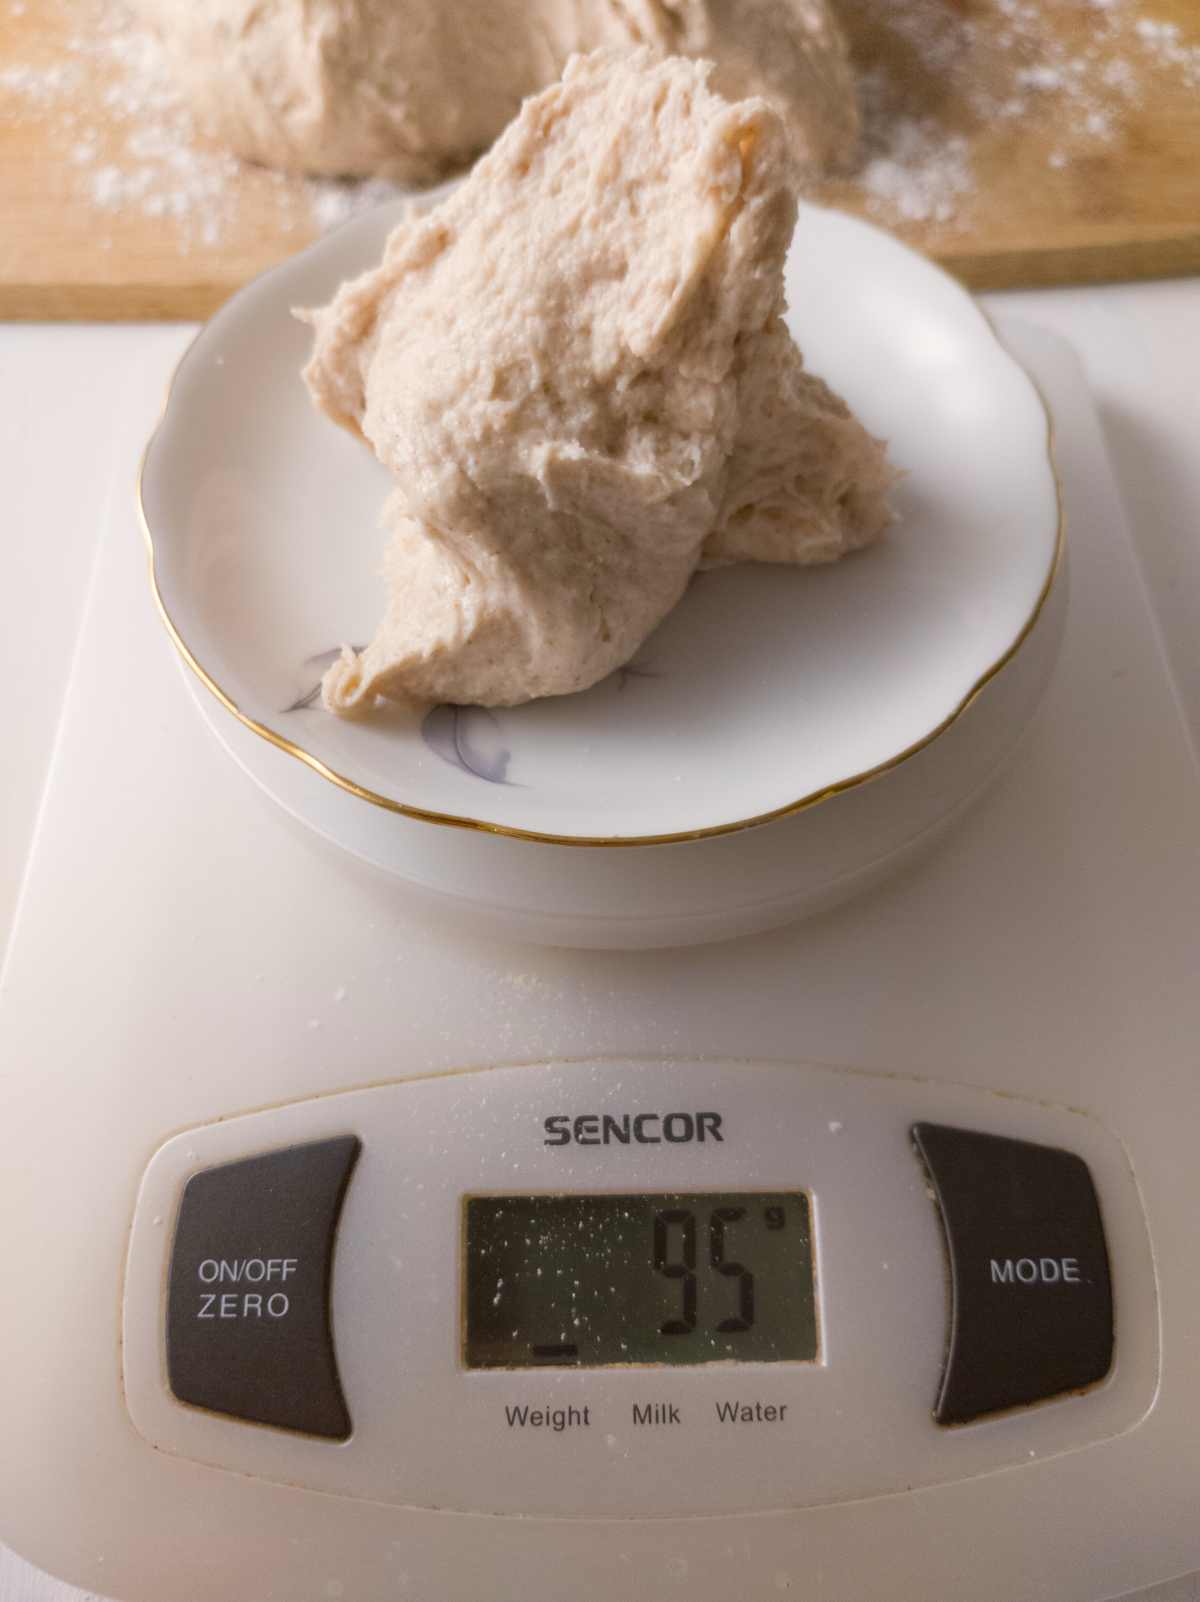 Measuring out the dough for one bowl on a digital scale.